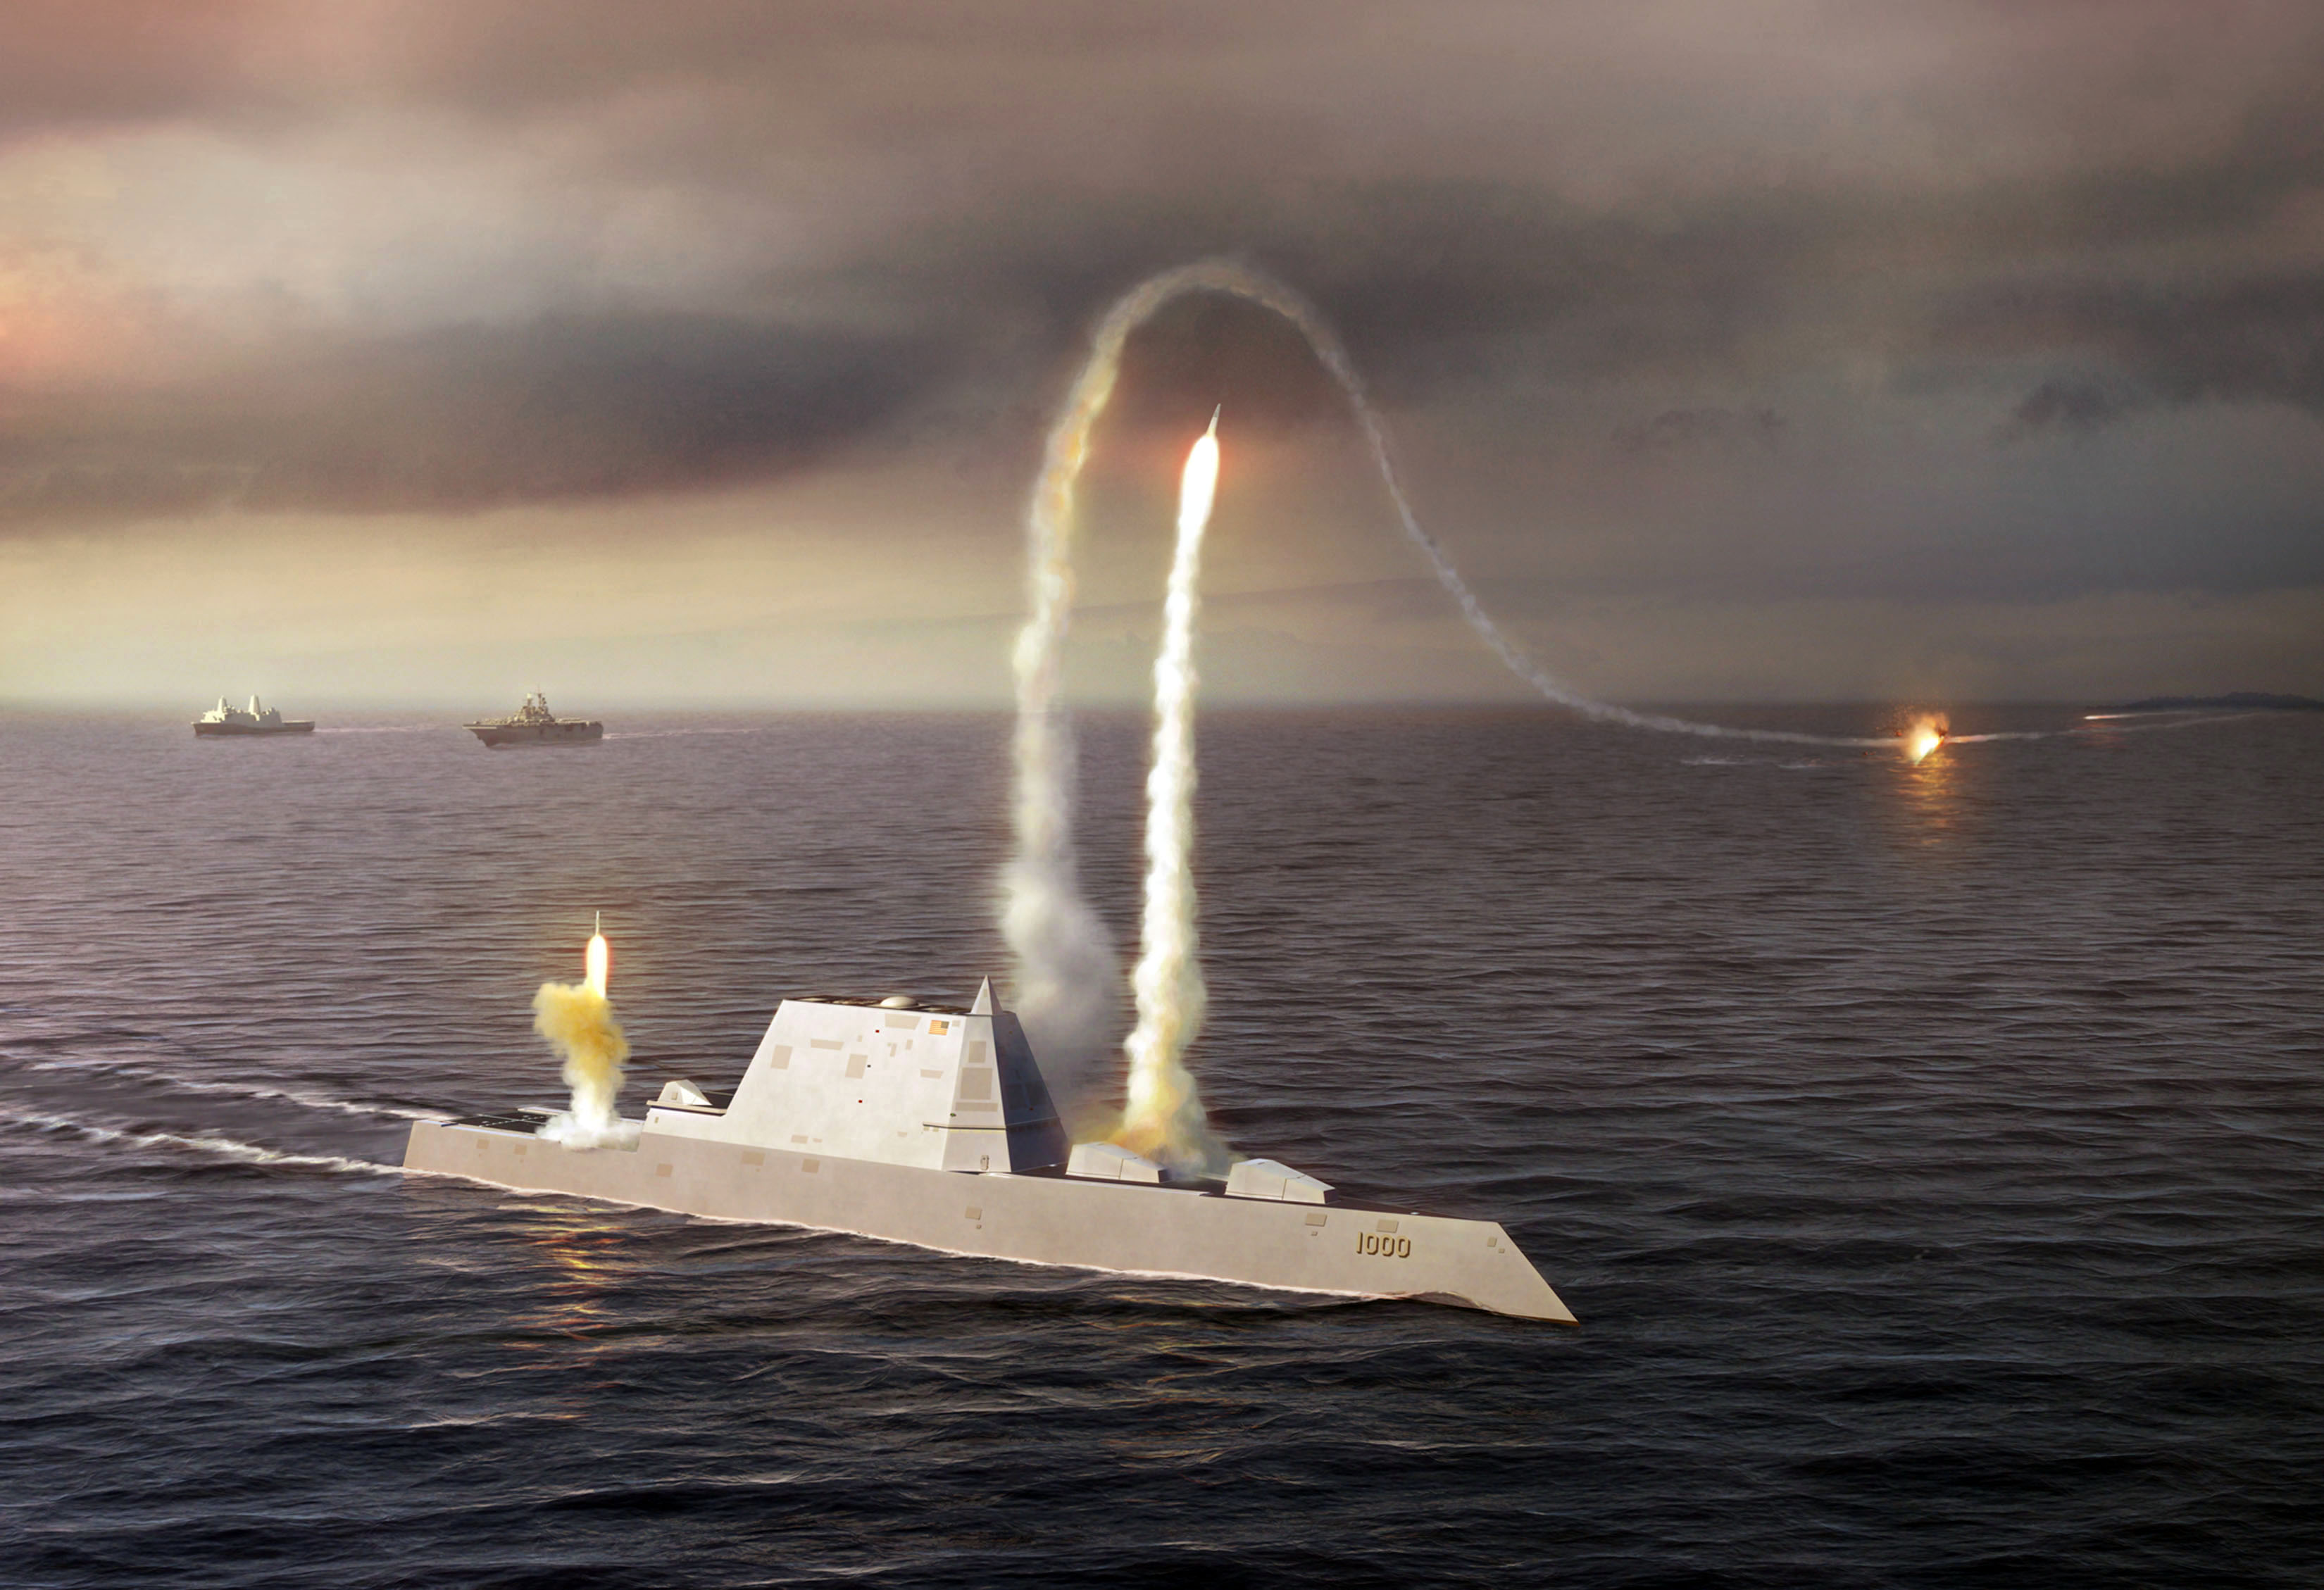 080723-N-0000X-001 An artist rendering of the Zumwalt class destroyer DDG 1000, a new class of multi-mission U.S. Navy surface combatant ship designed to operate as part of a joint maritime fleet, assisting Marine strike forces ashore as well as performing littoral, air and sub-surface warfare. (U.S. Navy photo illustration/Released)